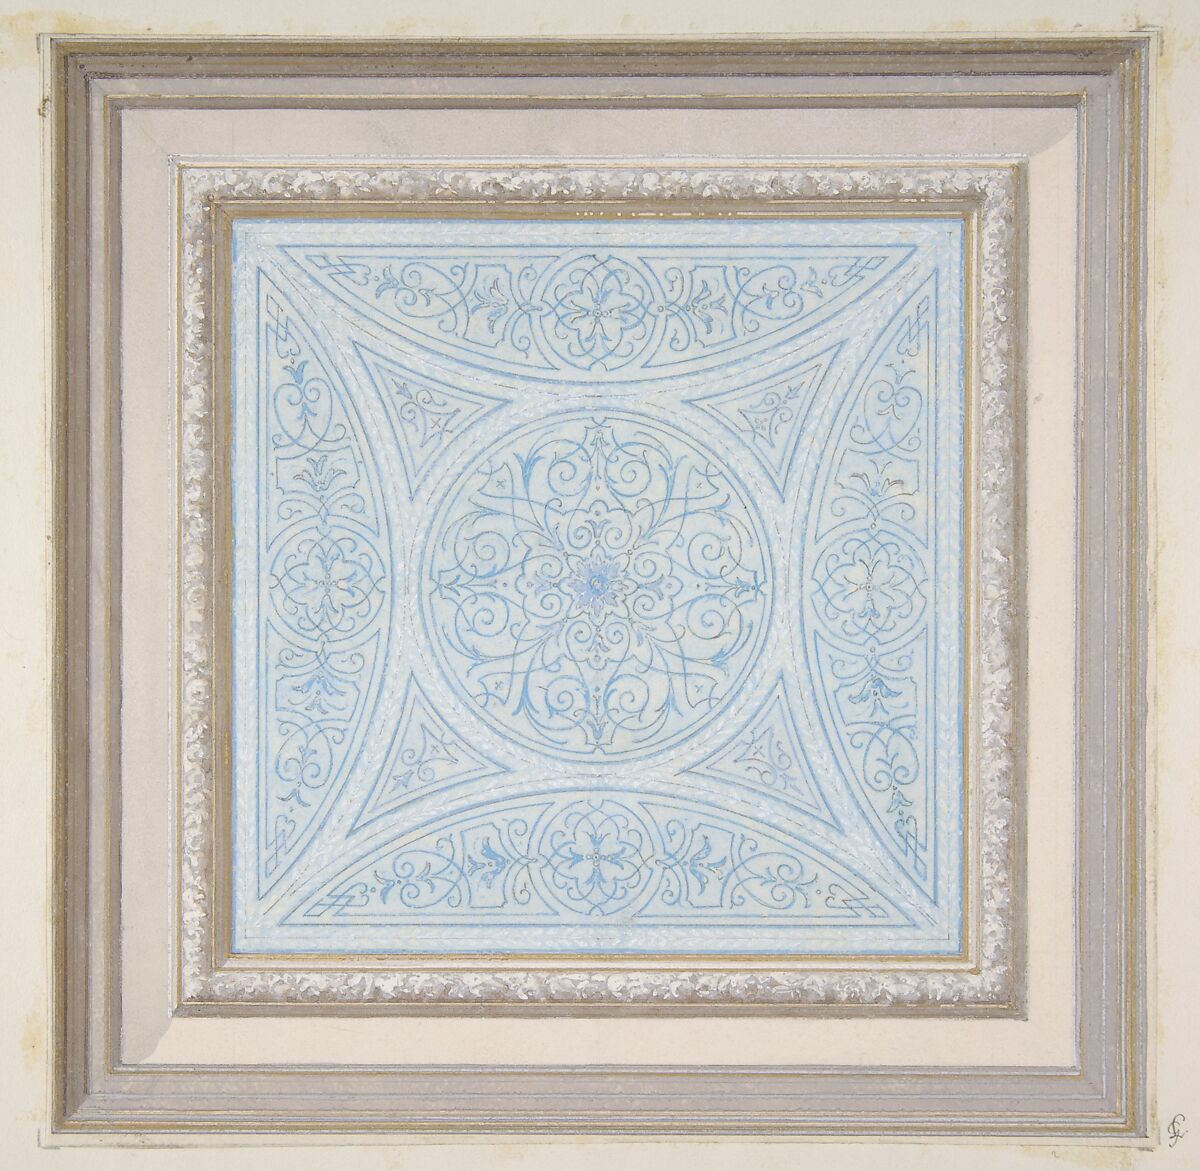 Design for a ceiling paianted in filagree patterns, Jules-Edmond-Charles Lachaise (French, died 1897), watercolor, gouache, and gold paint on wove paper; inlaid in wove paper 